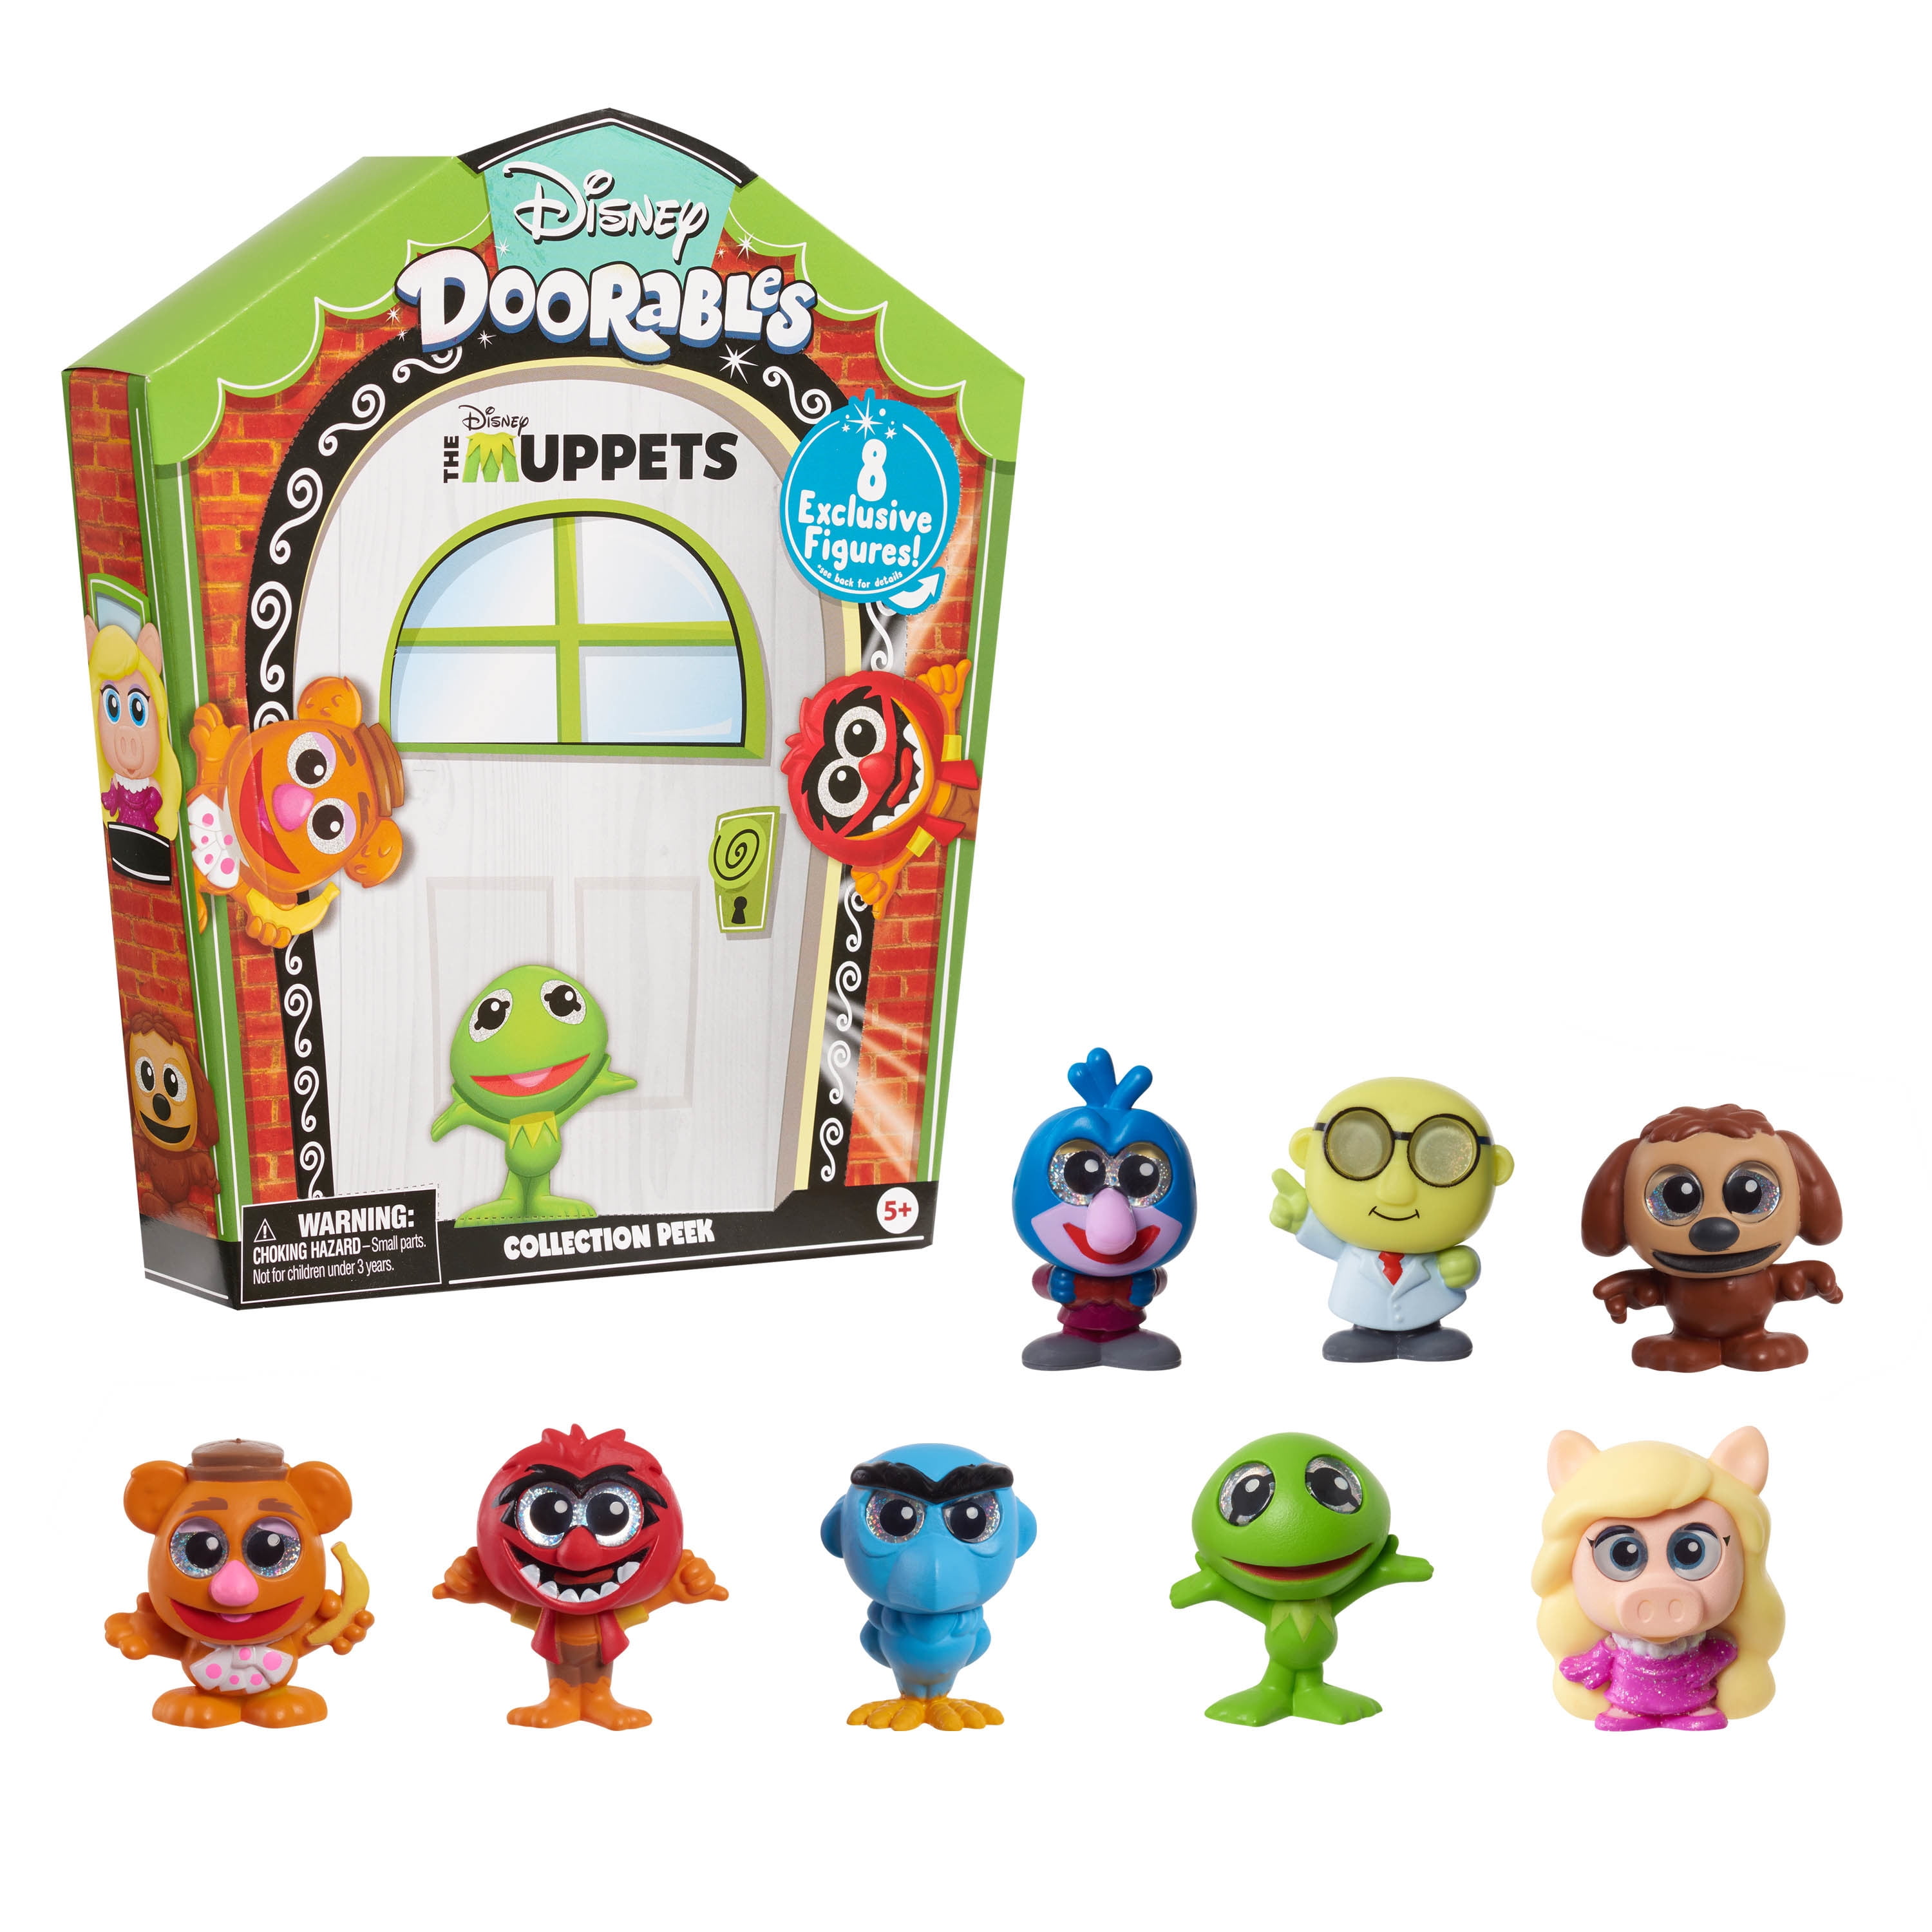 Disney Doorables Muppets Collection Peek, Blind Bag Figures, Officially Licensed Kids Toys for Ages 3 Up, Gifts and Presents